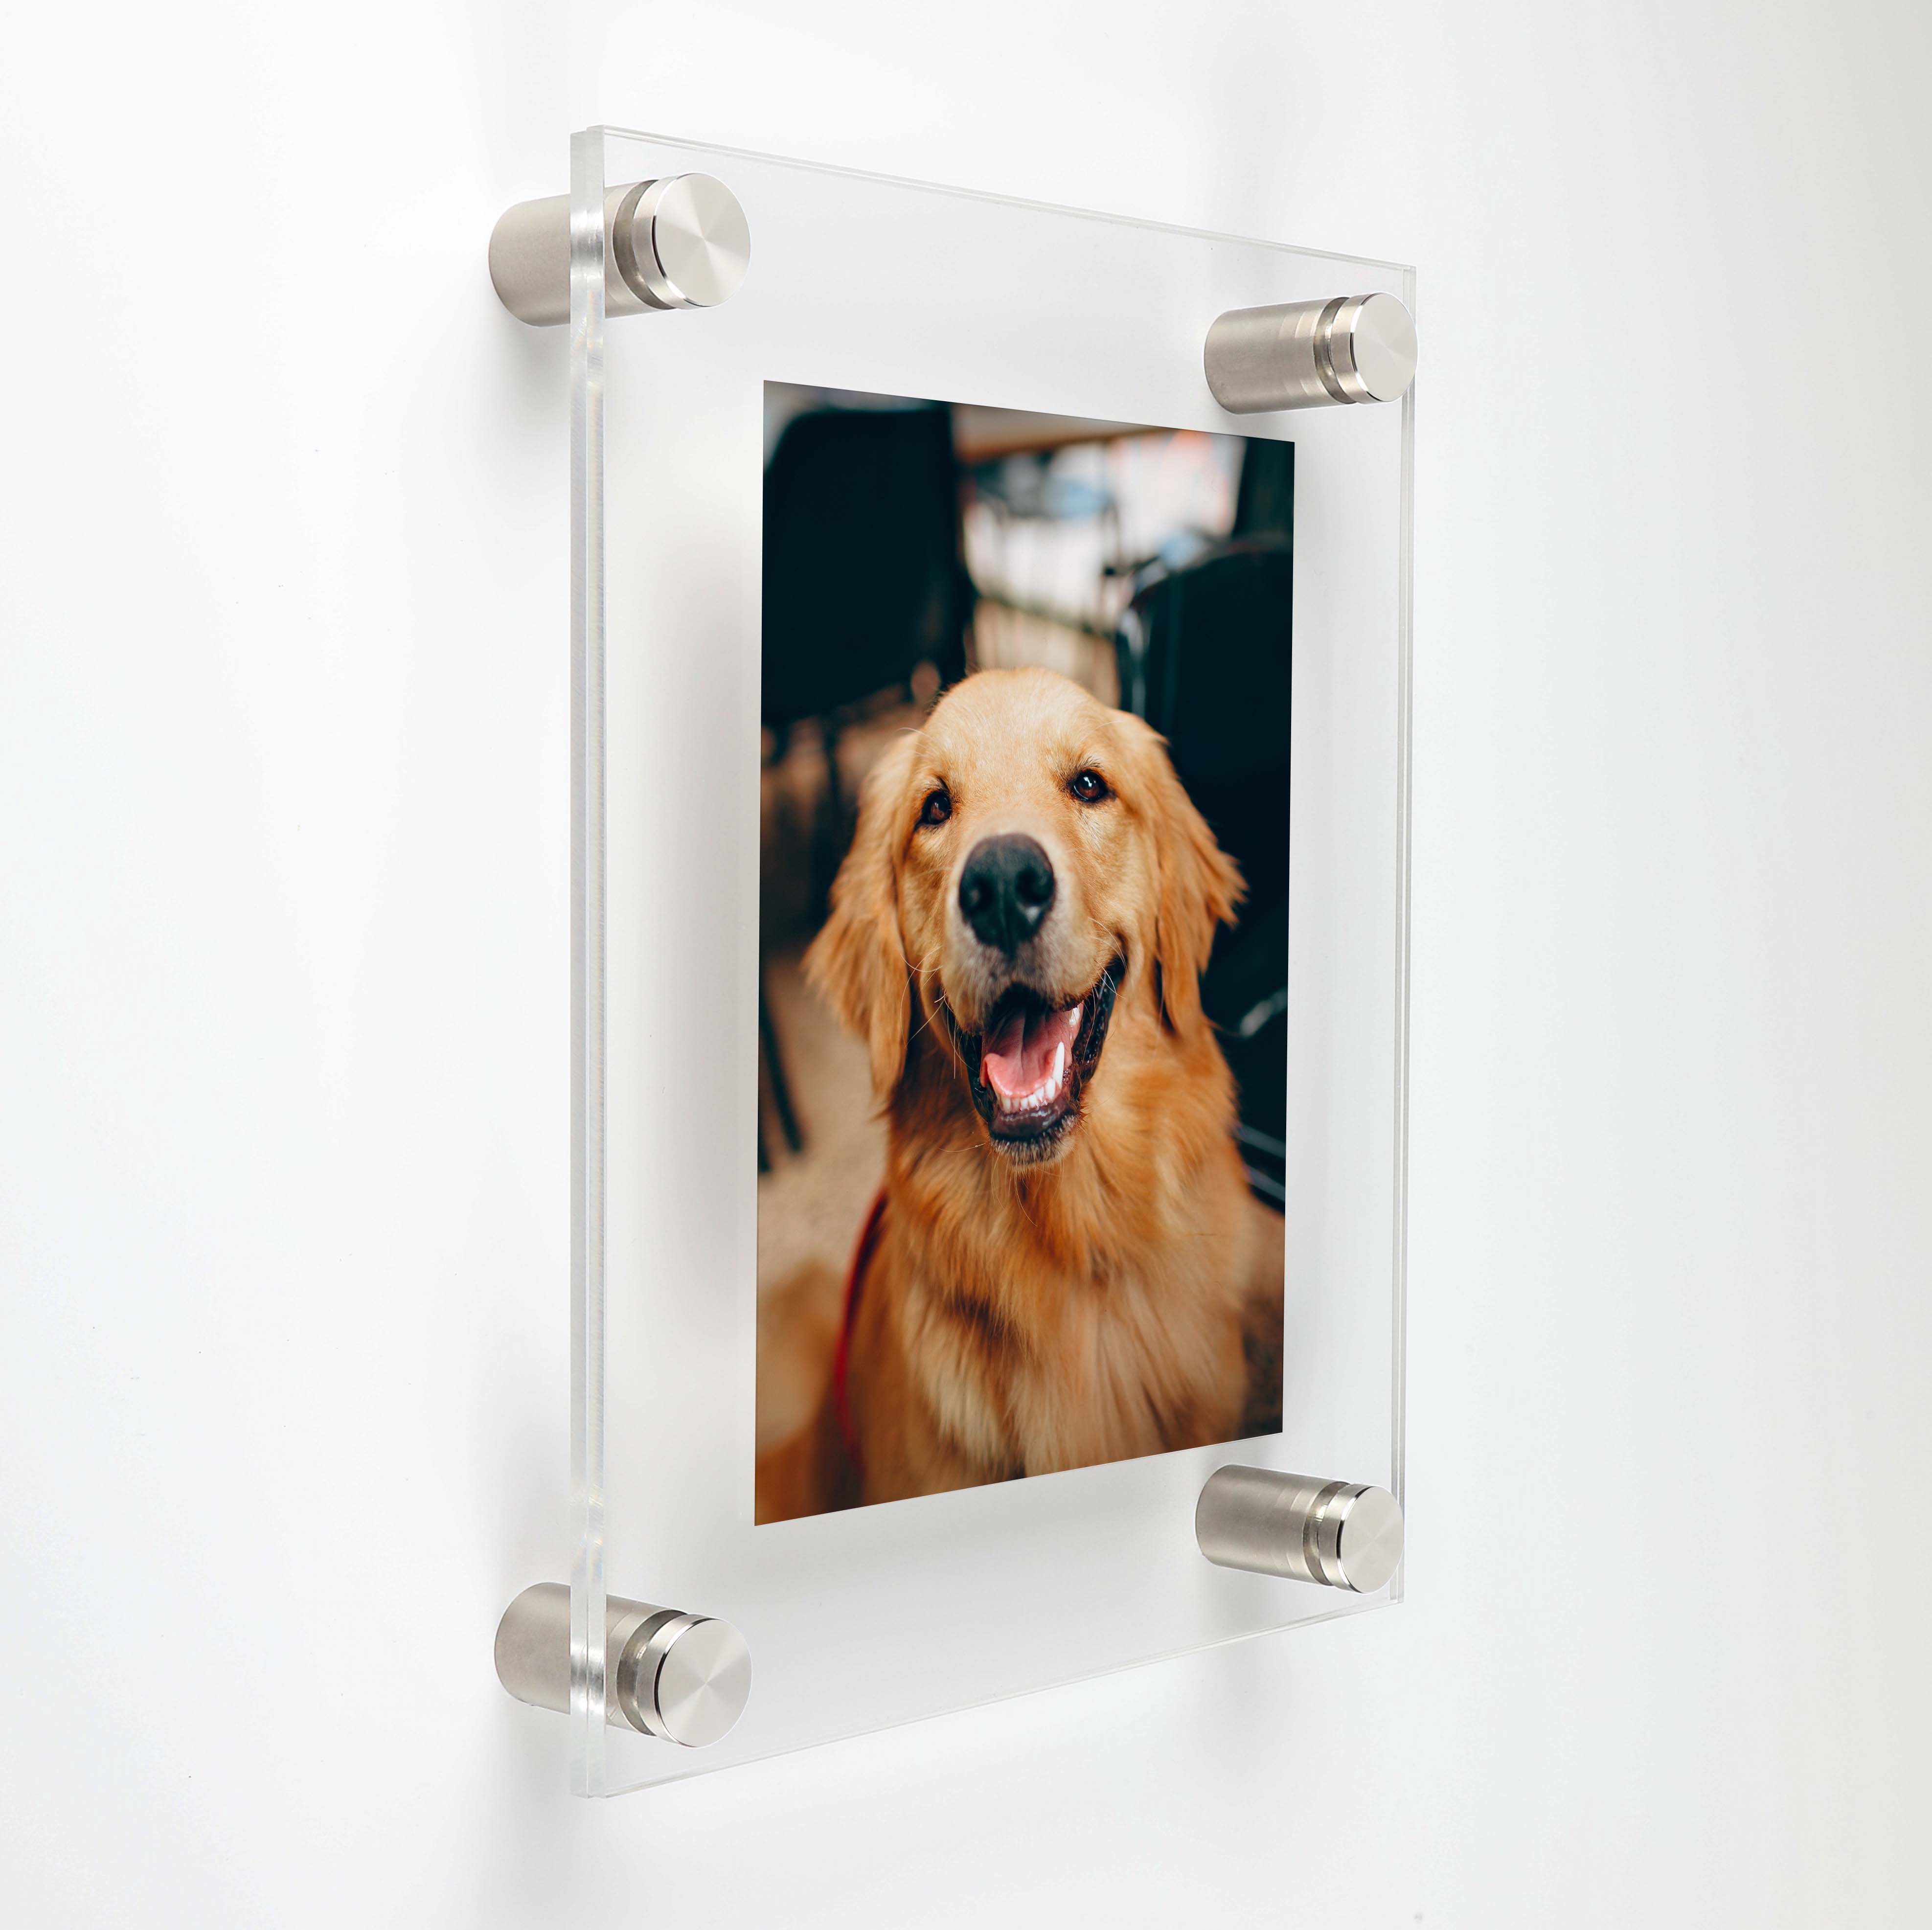 (2) 13-1/2'' x 16-1/2'' Clear Acrylics , Pre-Drilled With Polished Edges (Thick 1/8'' each), Wall Frame with (4) 3/4'' x 1/2'' Brushed Stainless Steel Standoffs includes Screws and Anchors